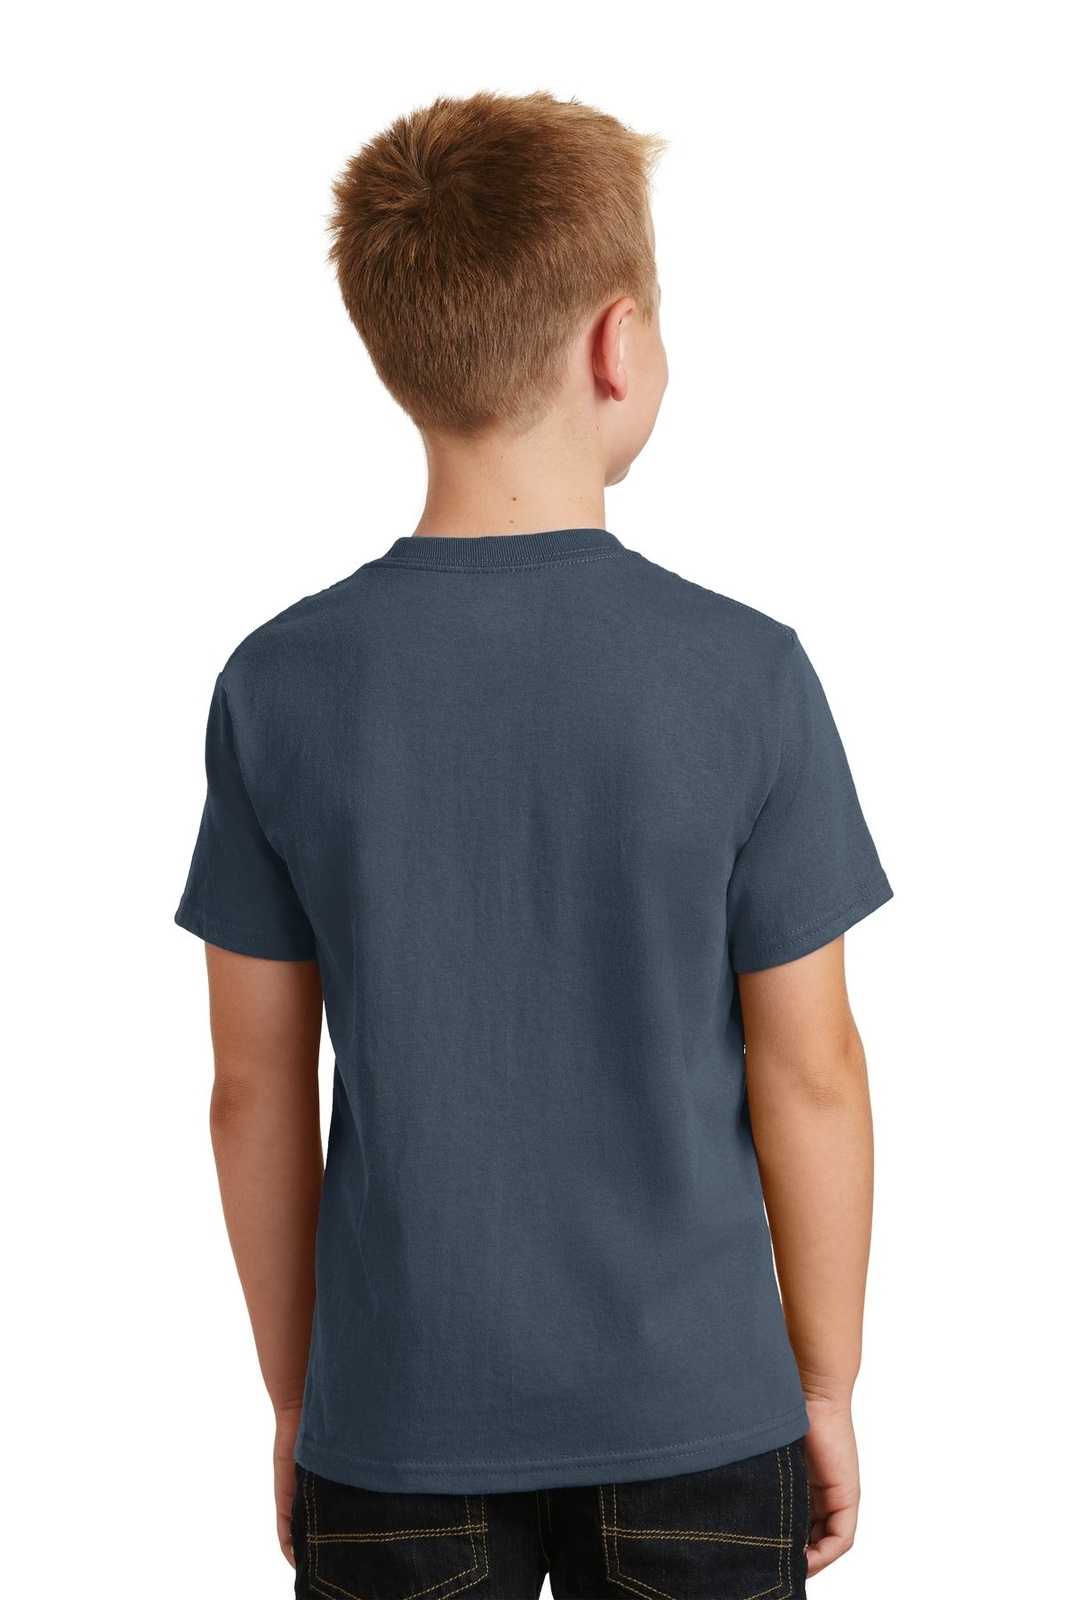 Port & Company PC54Y Youth Core Cotton Tee - Steel Blue - HIT a Double - 1